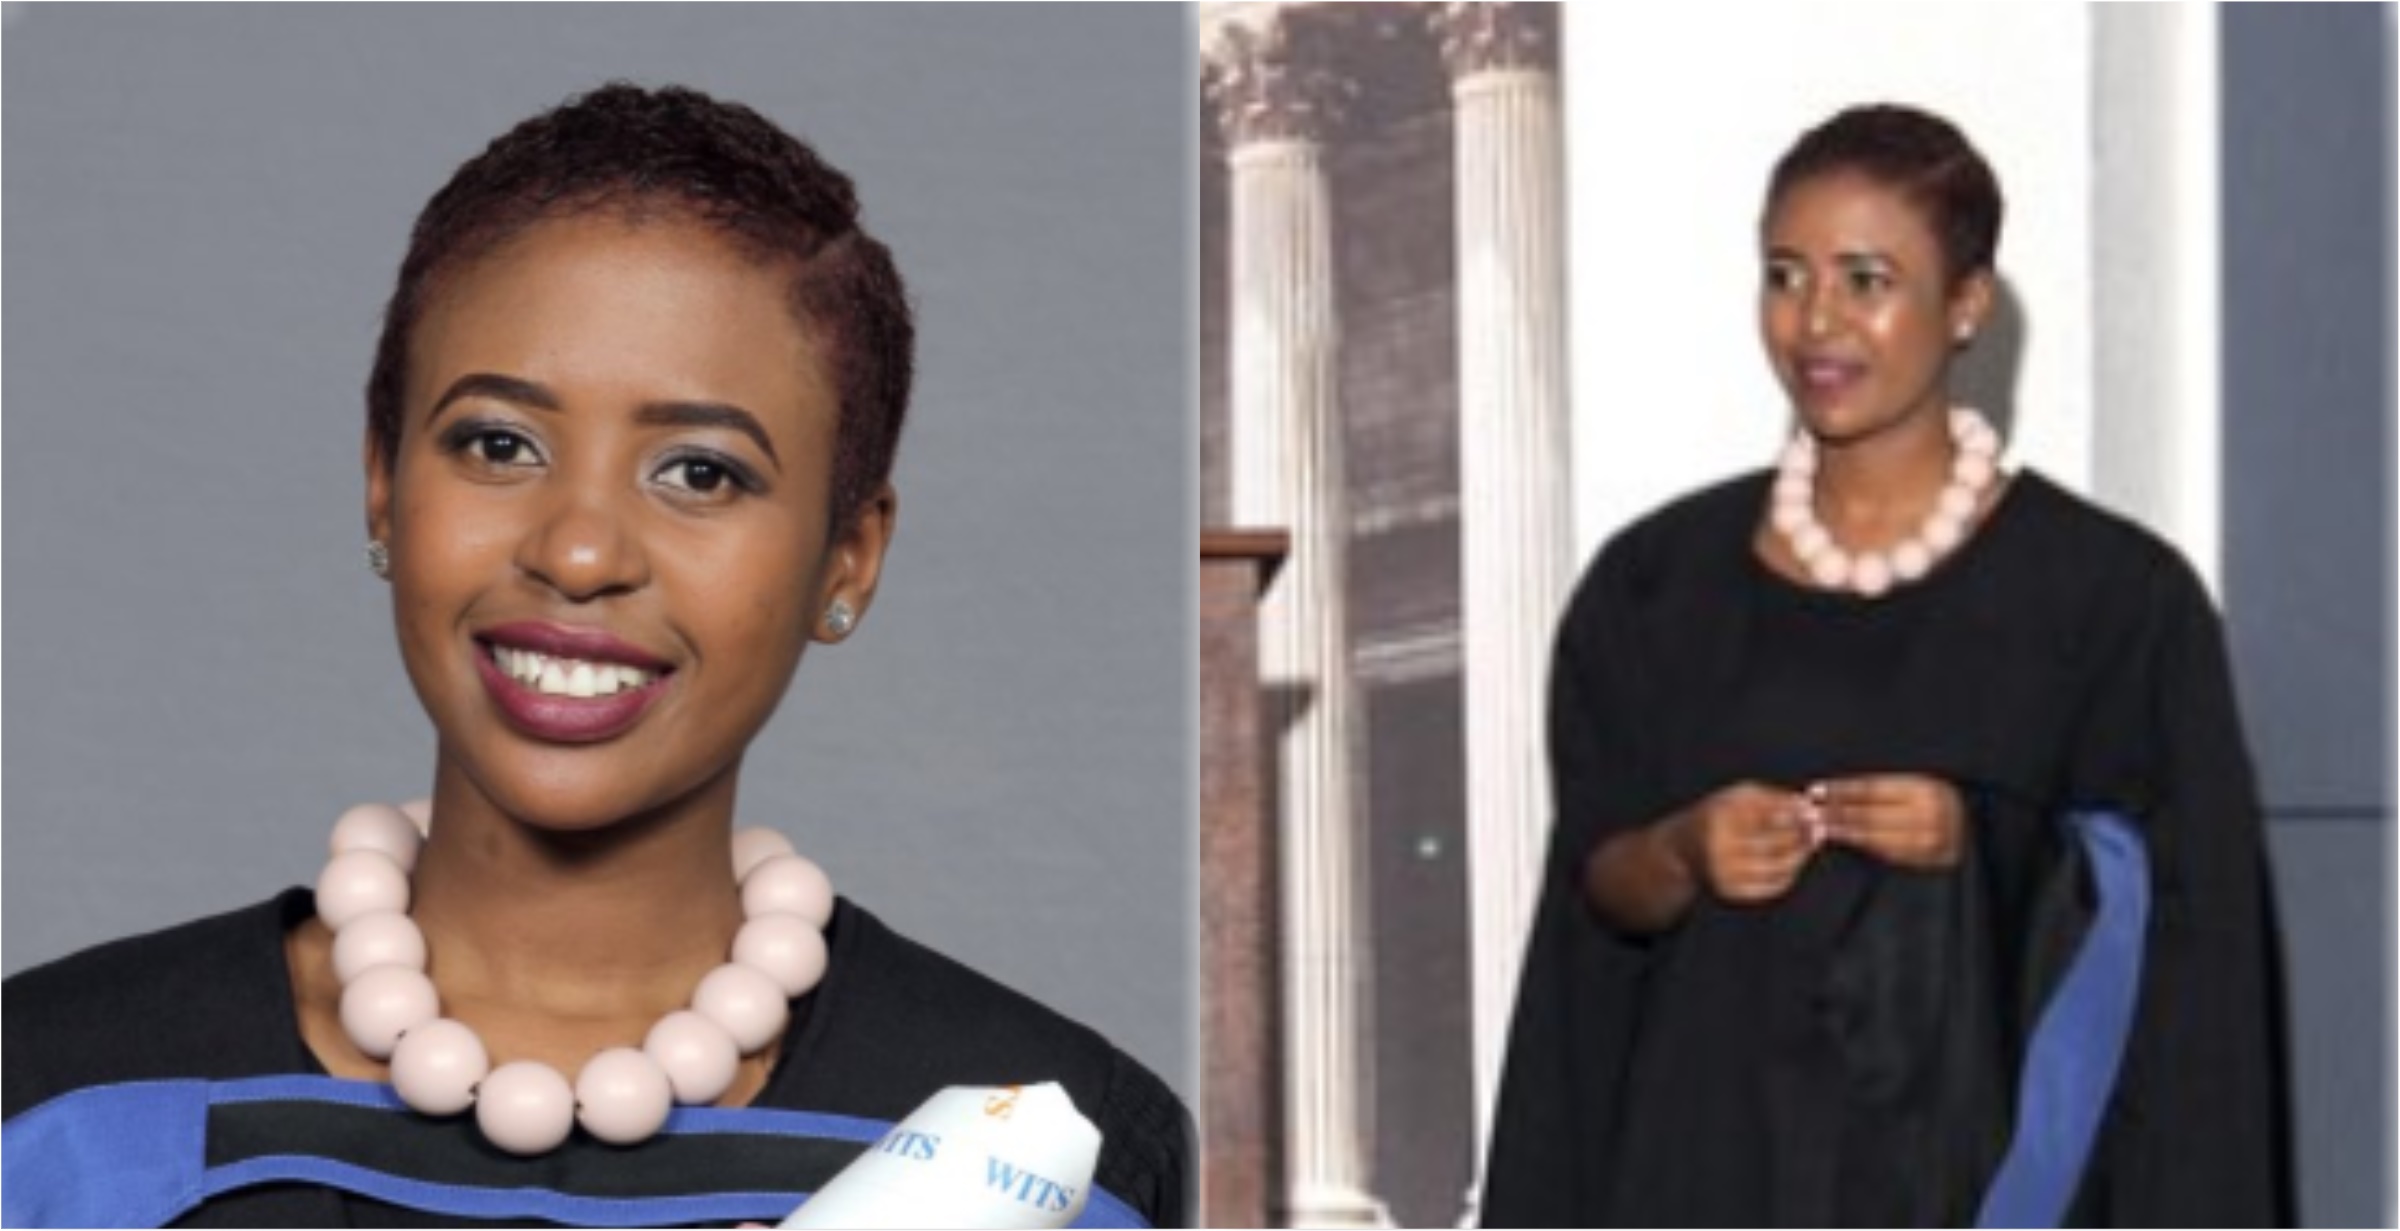 PHOTOS: I'm the girl - Smart lady shows off education success as she graduates from revered university